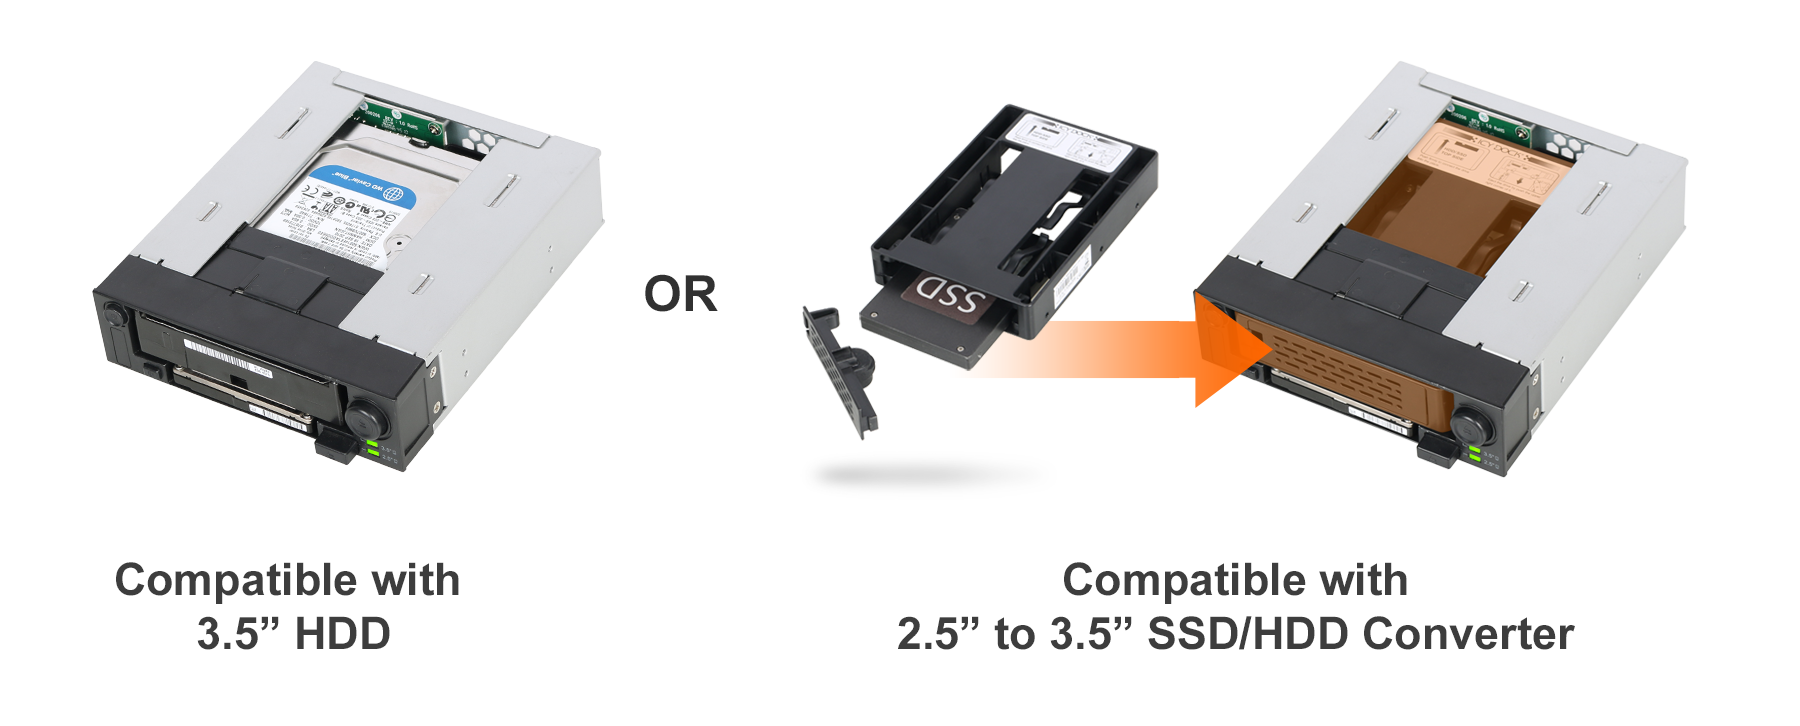 mb971sp-b Optional 2.5 to 3.5 SSD/HDD Converter